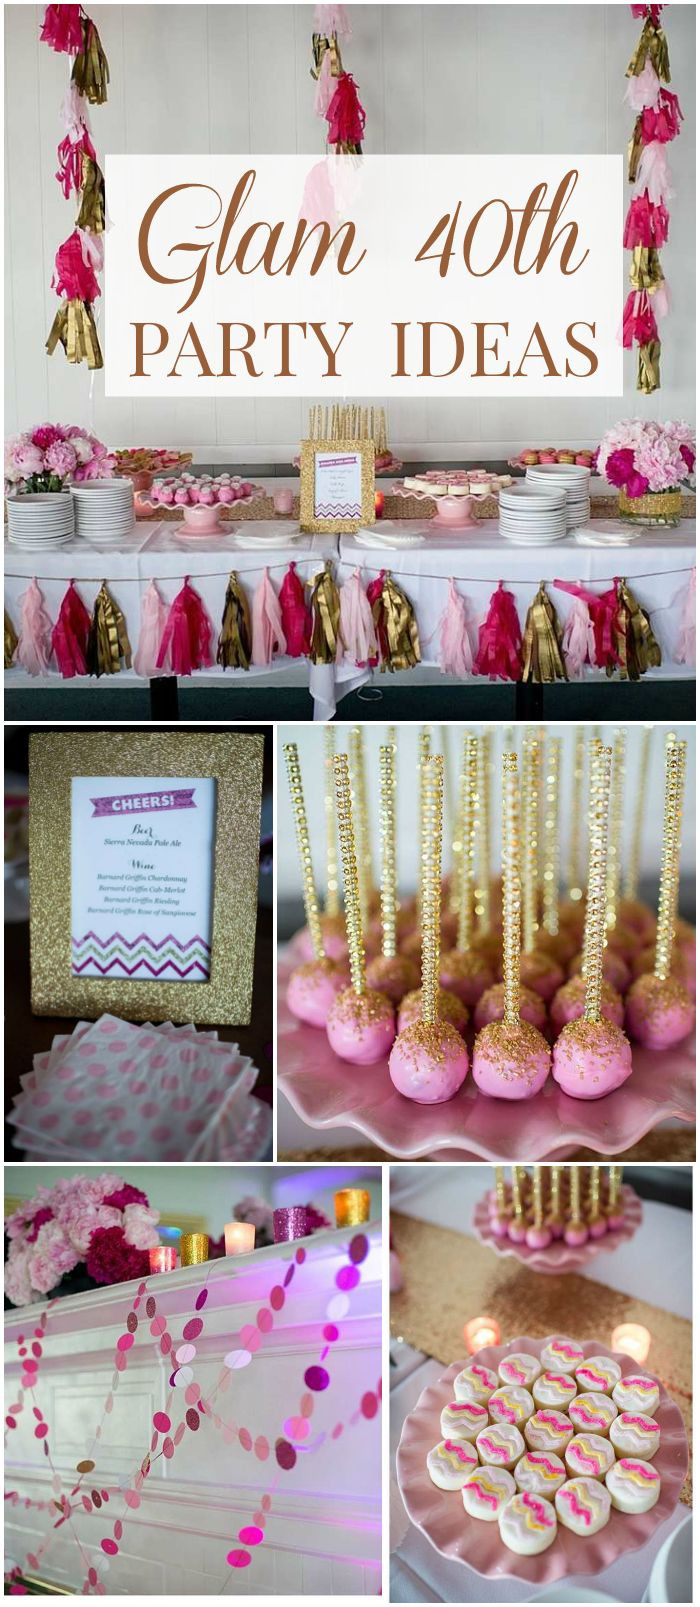 40th Birthday Decoration Ideas
 This pink and gold 40th birthday soiree is full of glitz